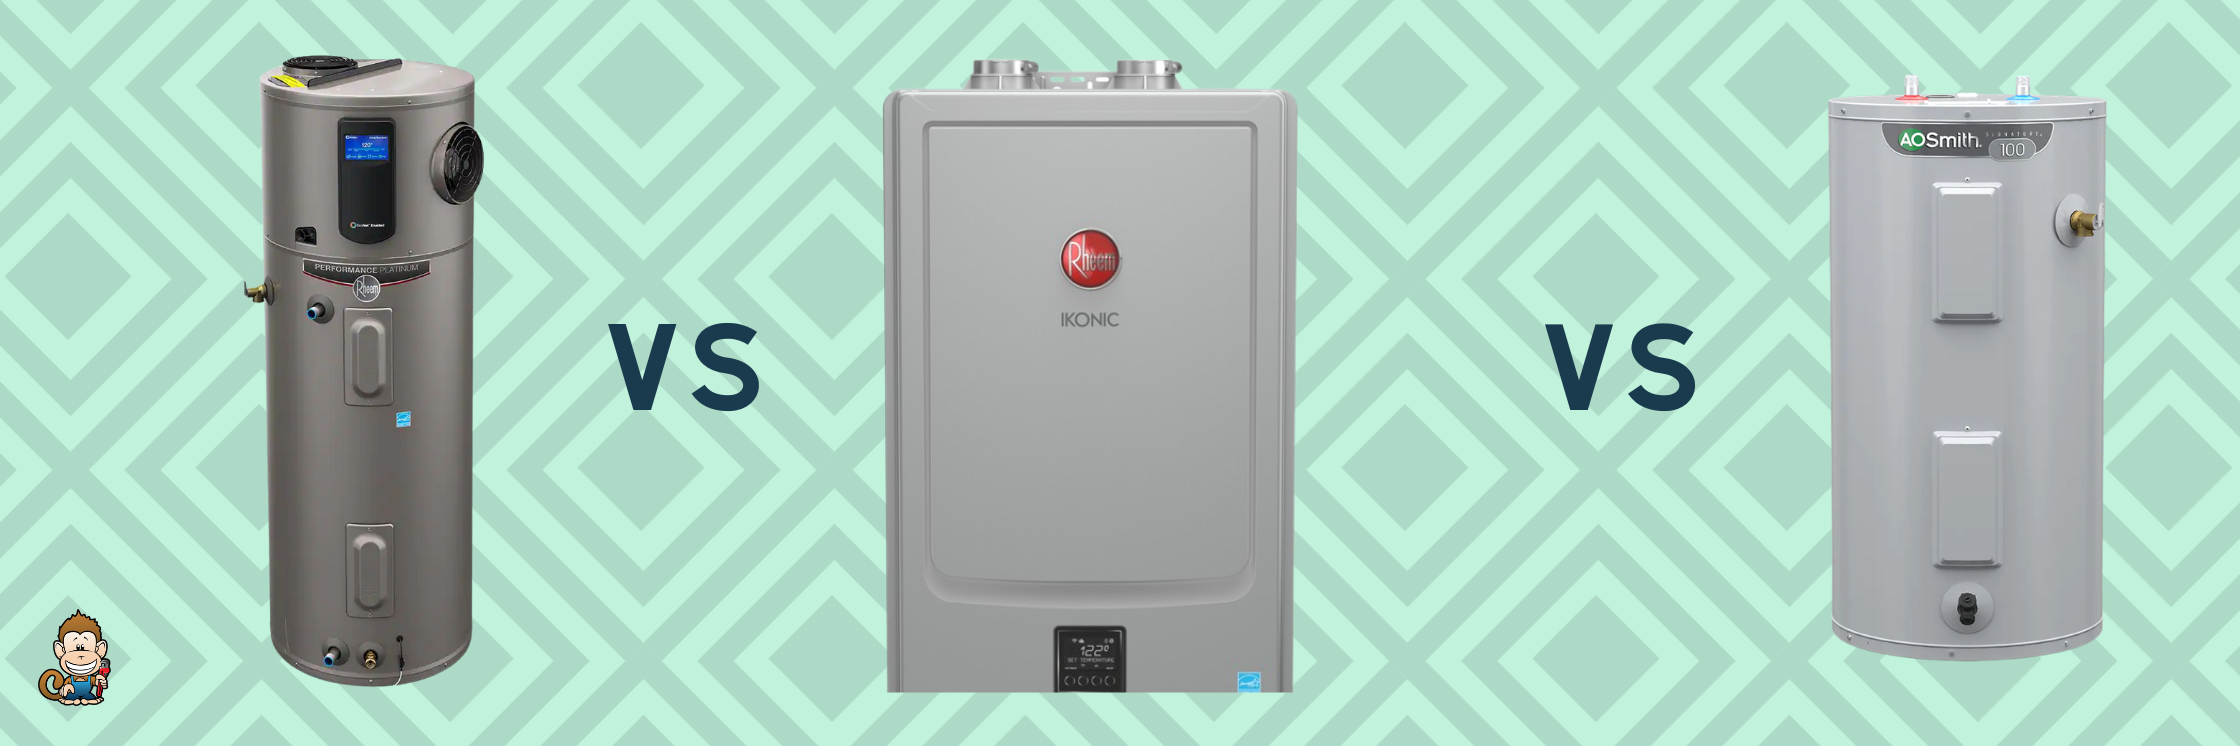 Ultimate Water Heater Review: Tankless vs Tank-style vs Hybrid